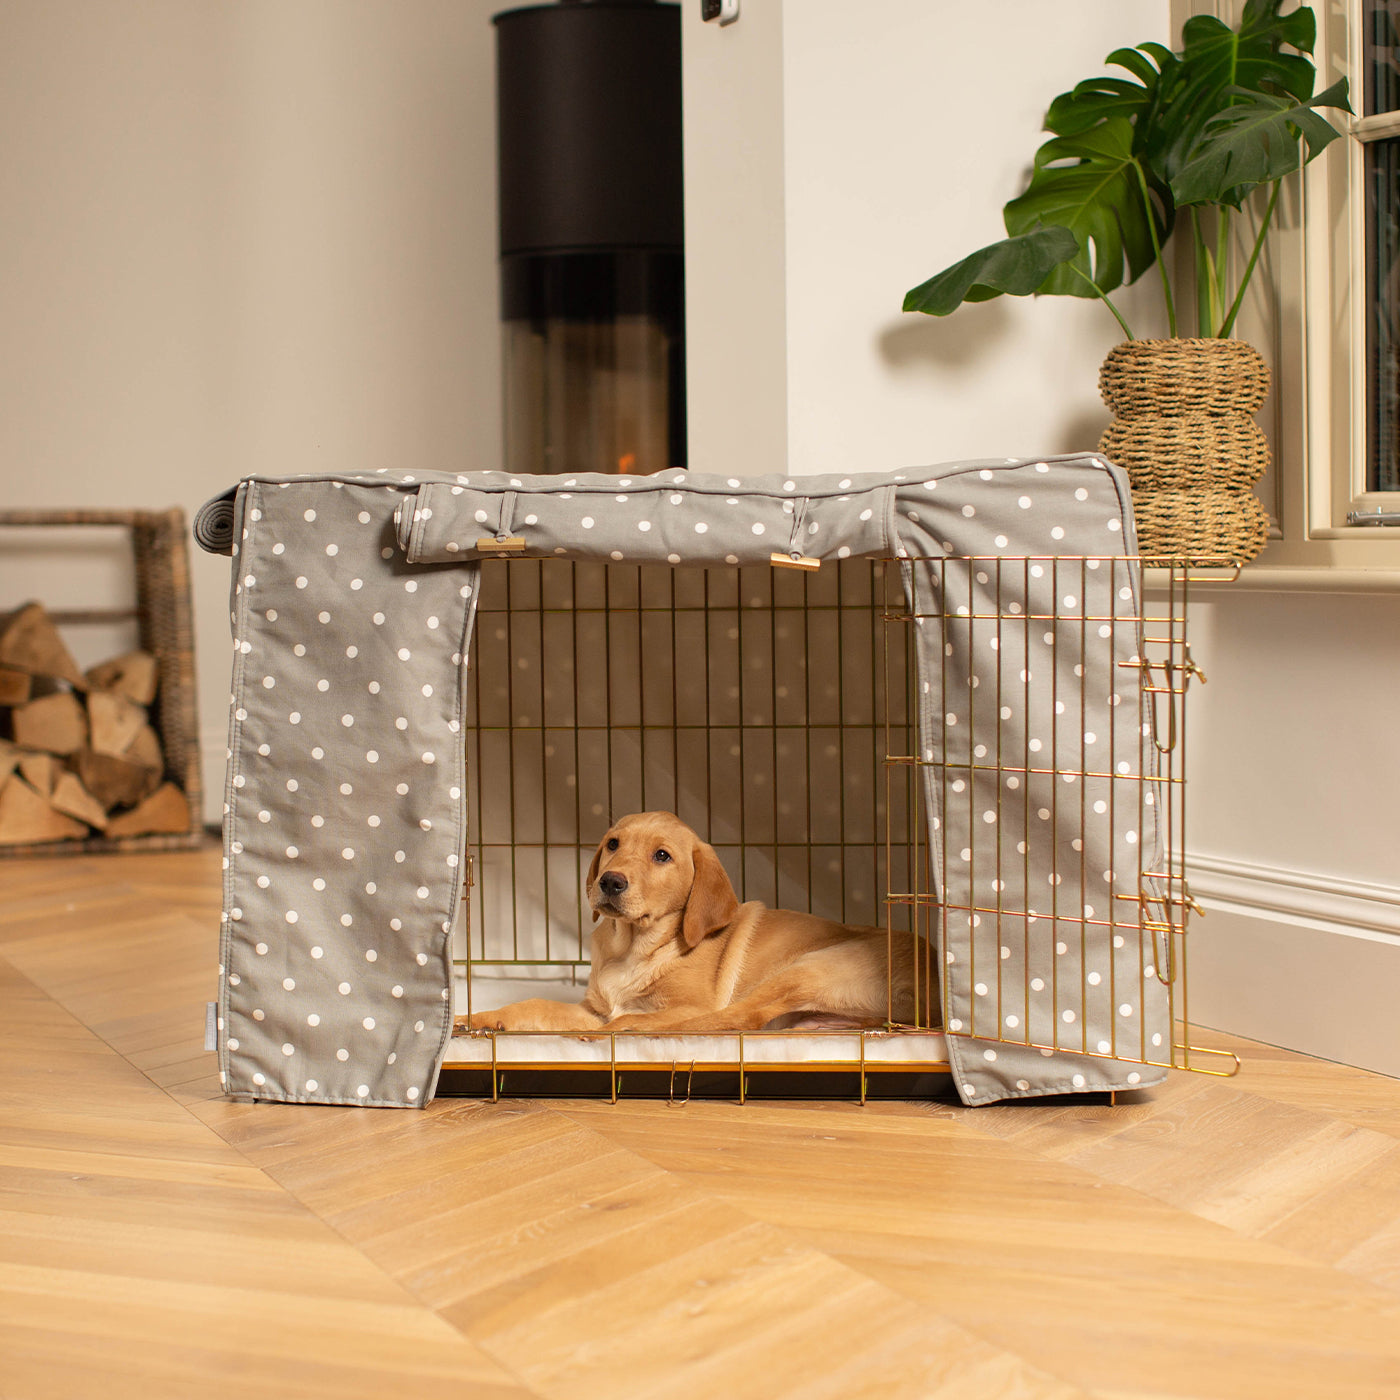 Luxury Gold Dog Cage With Grey Spot Cage Cover, The Perfect Dog Crate For The Ultimate Naptime, Available Now at Lords & Labradors US